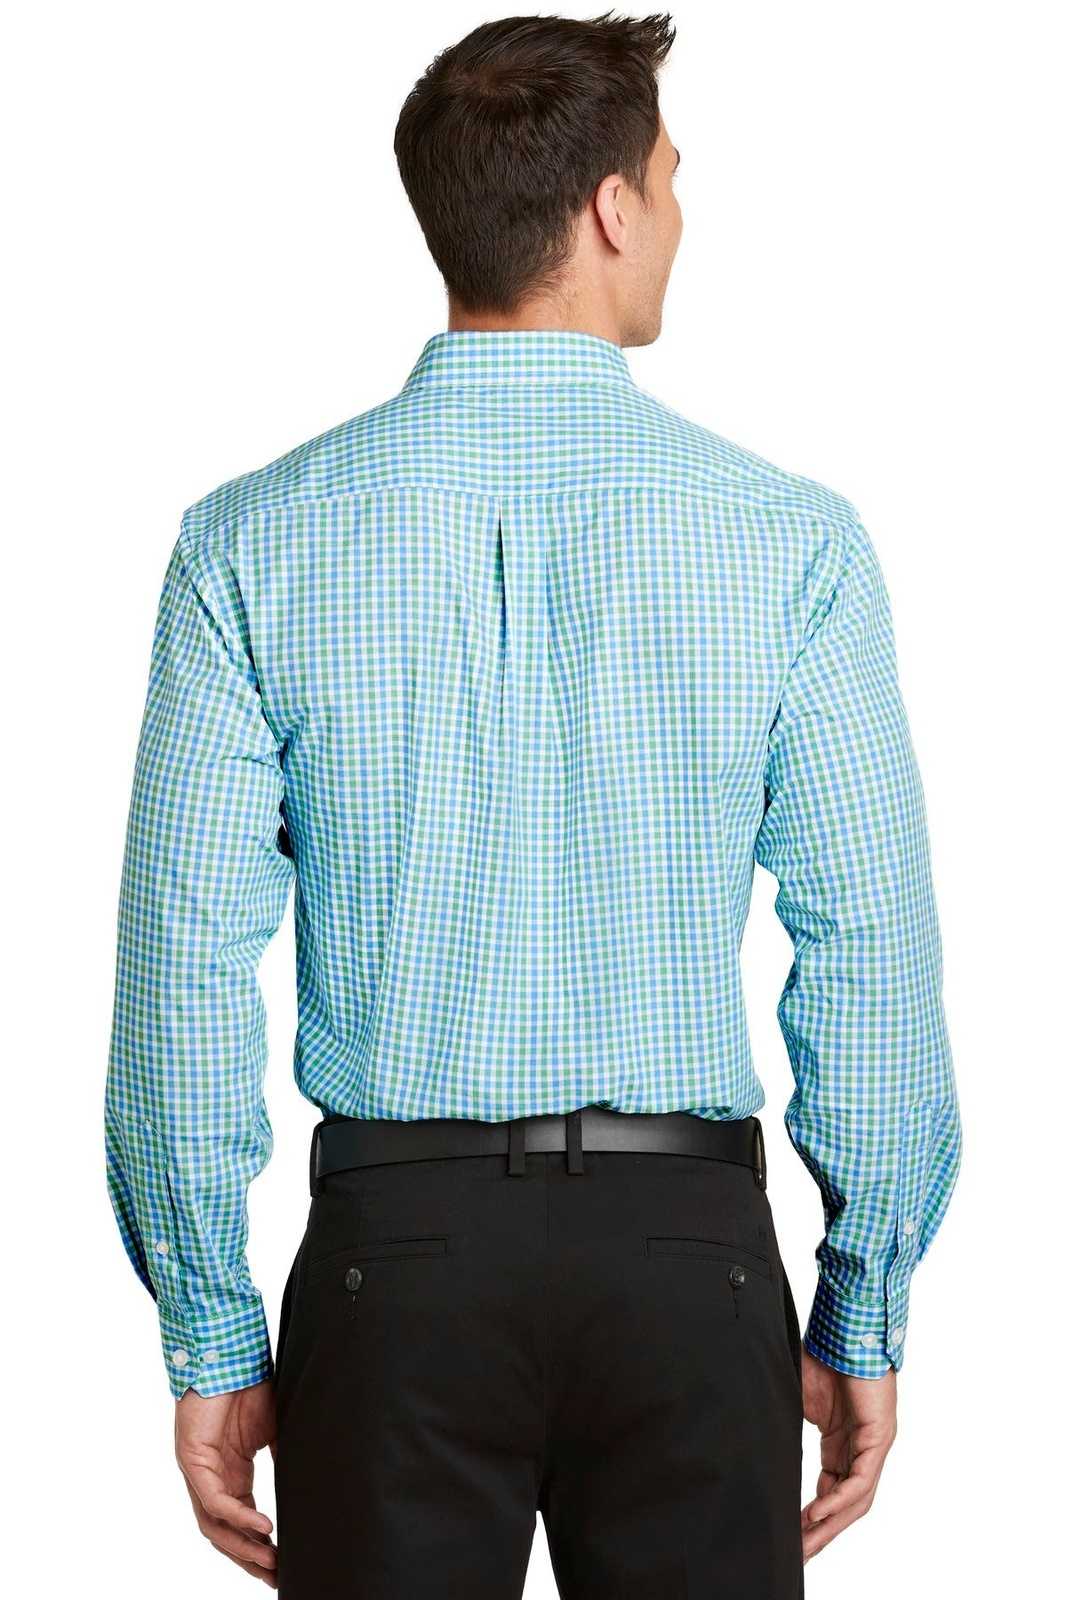 Port Authority S654 Long Sleeve Gingham Easy Care Shirt - Green Aqua - HIT a Double - 1